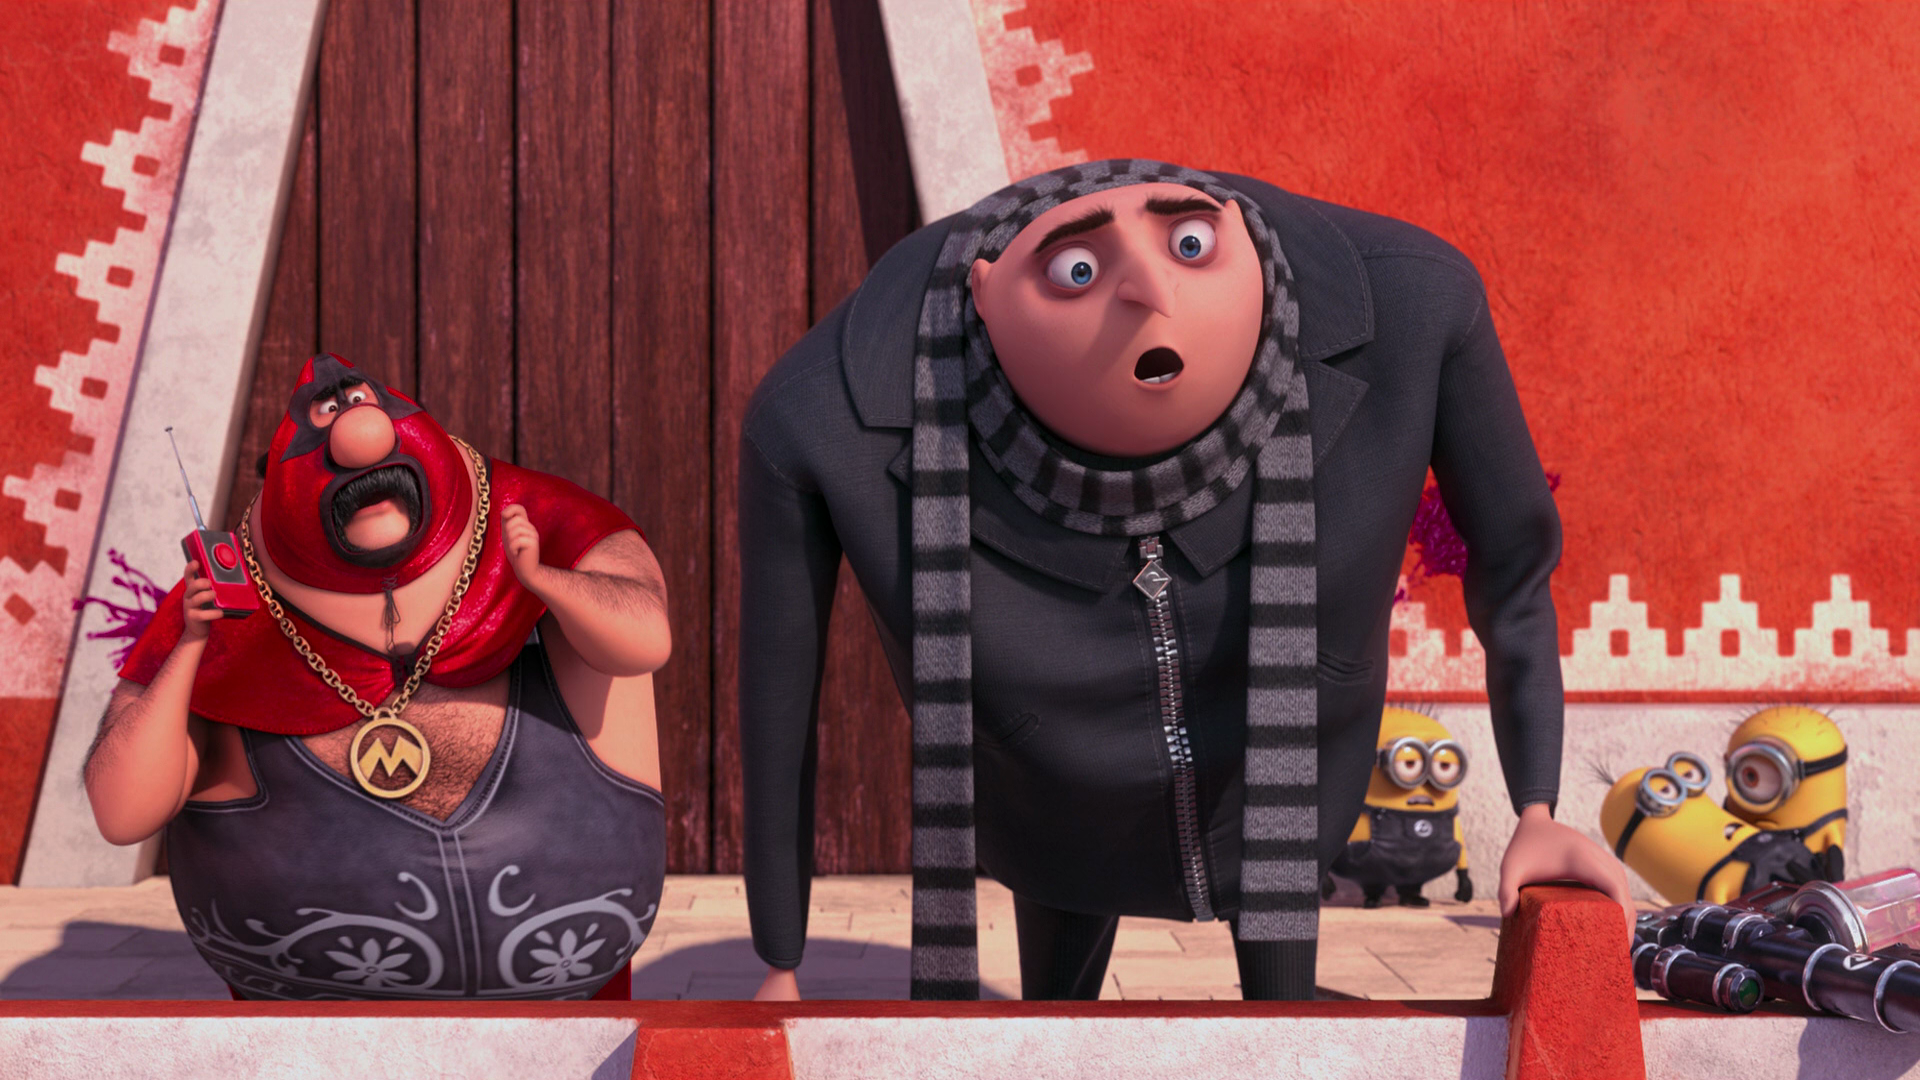 Despicable Me 2 HD Wallpaper Background Image 1920x1080 ID